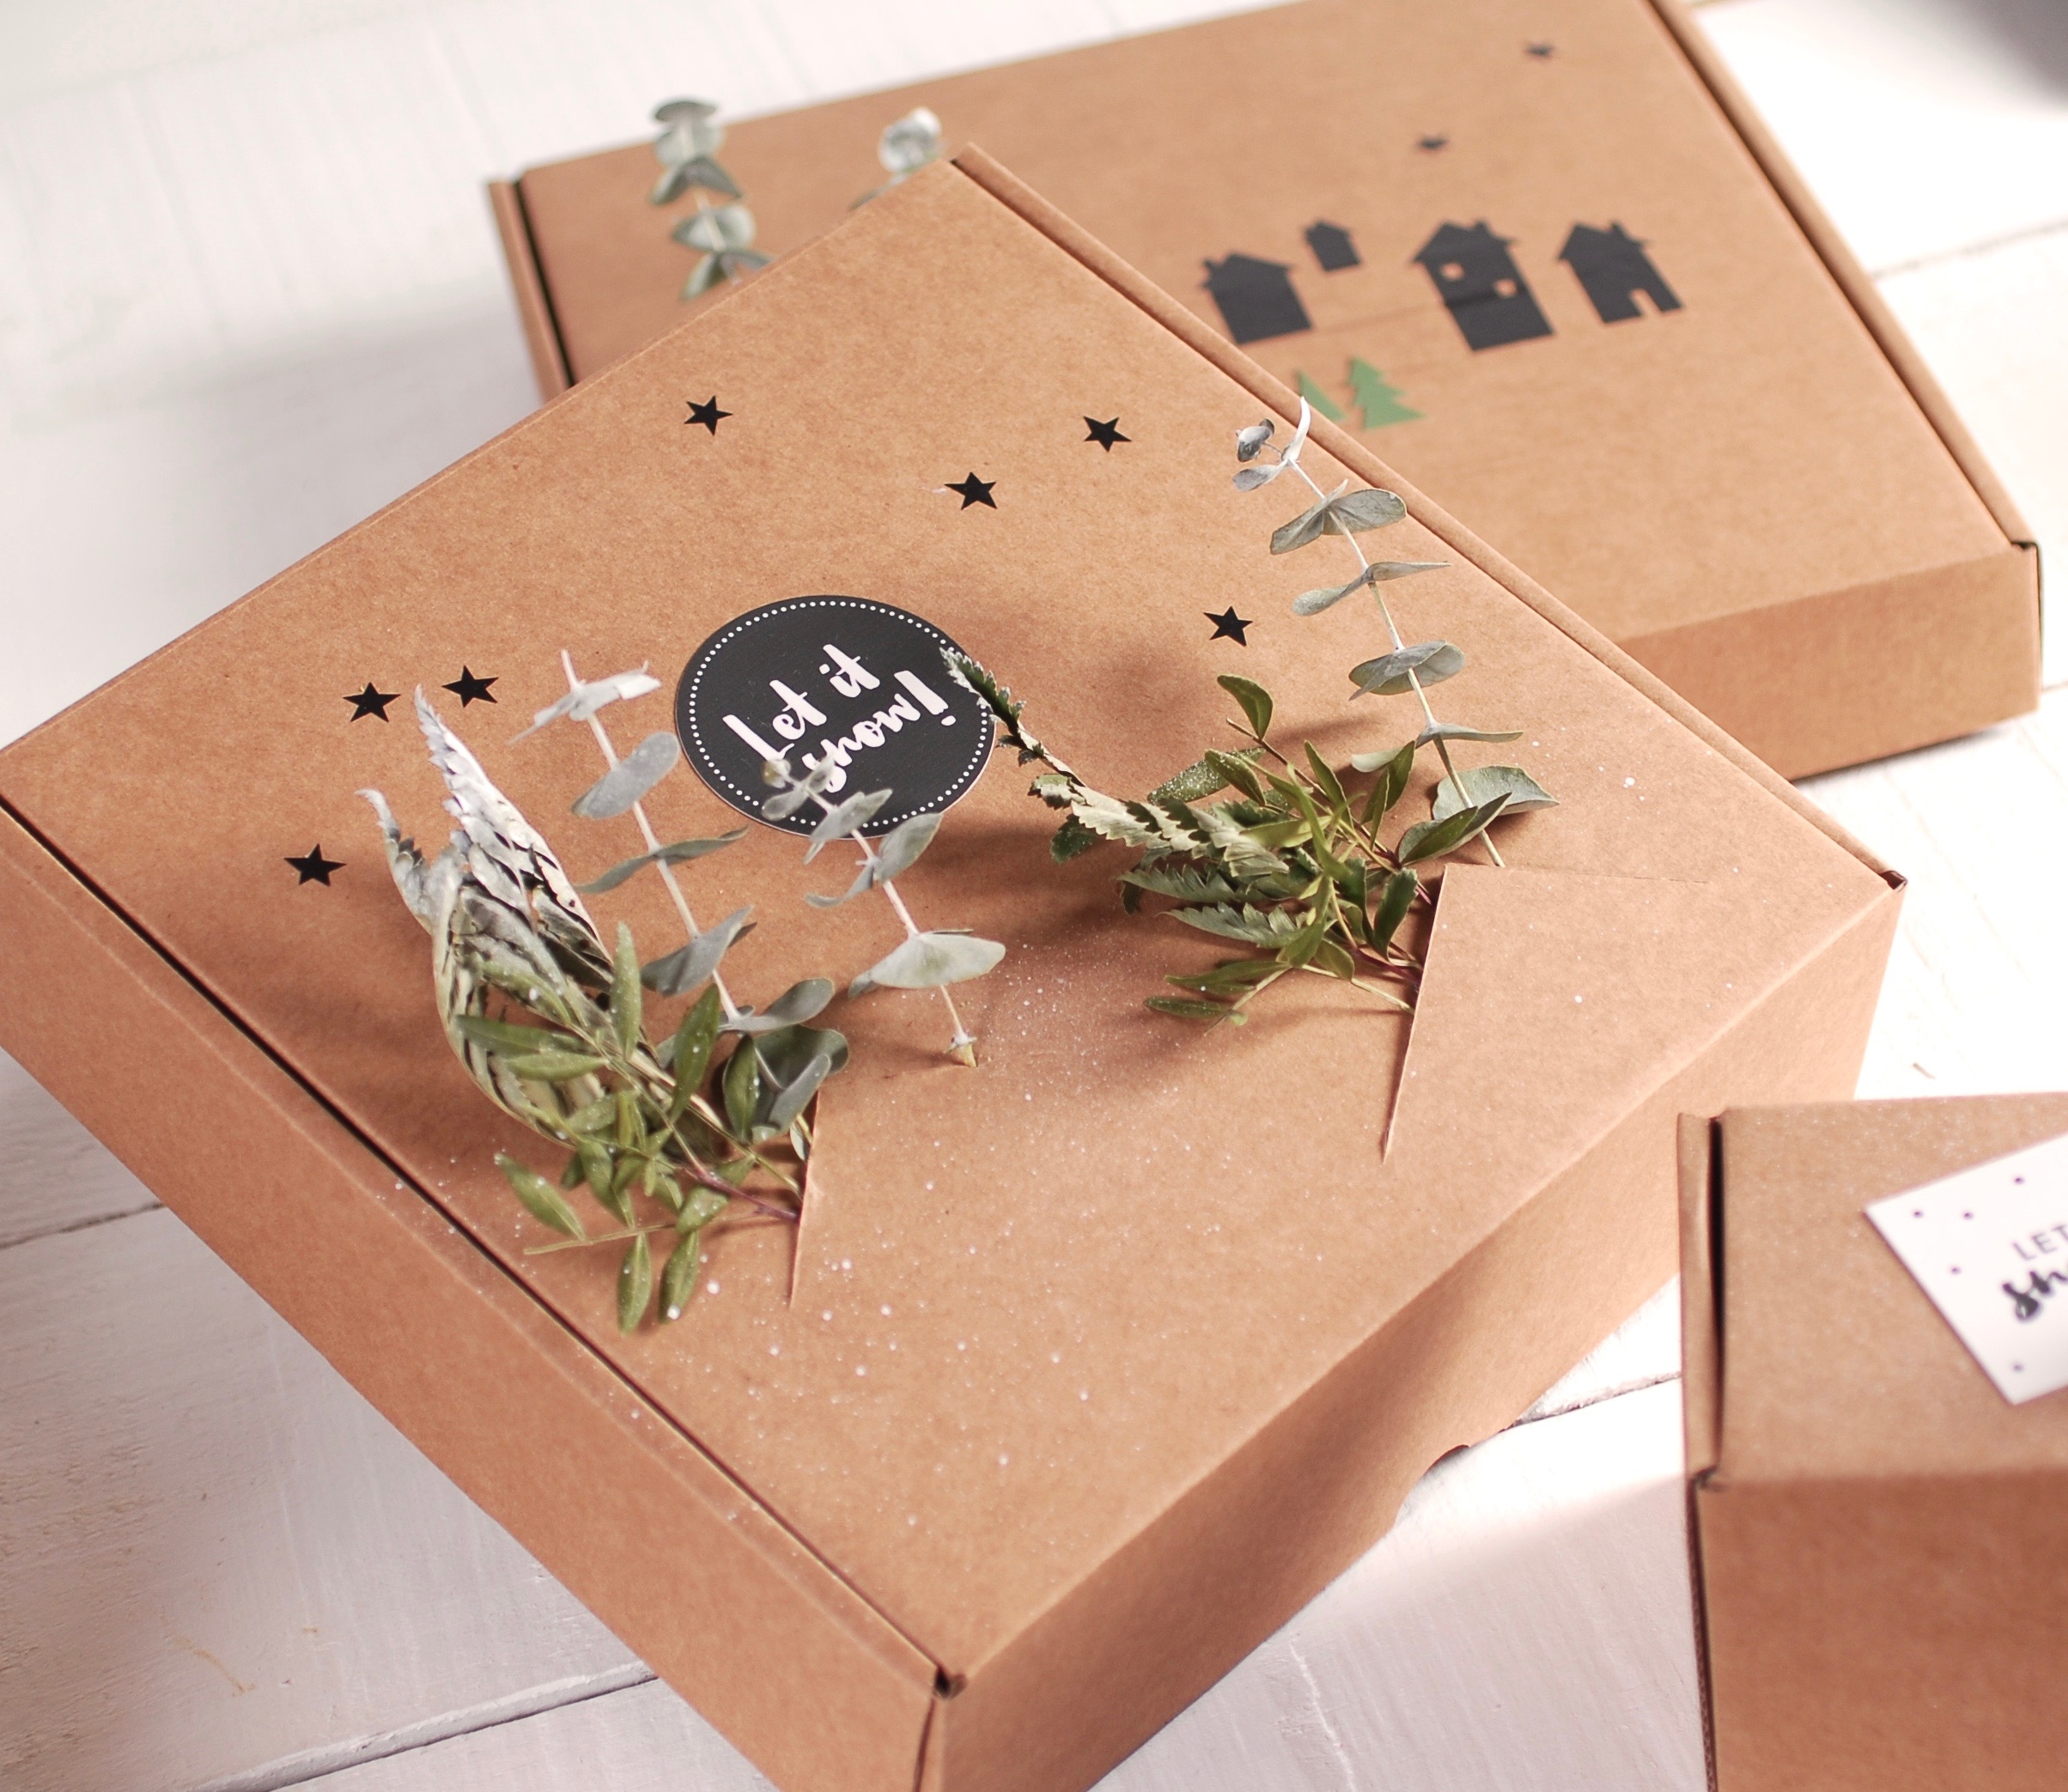 How to Give Gifts in Cardboard Shipping Boxes